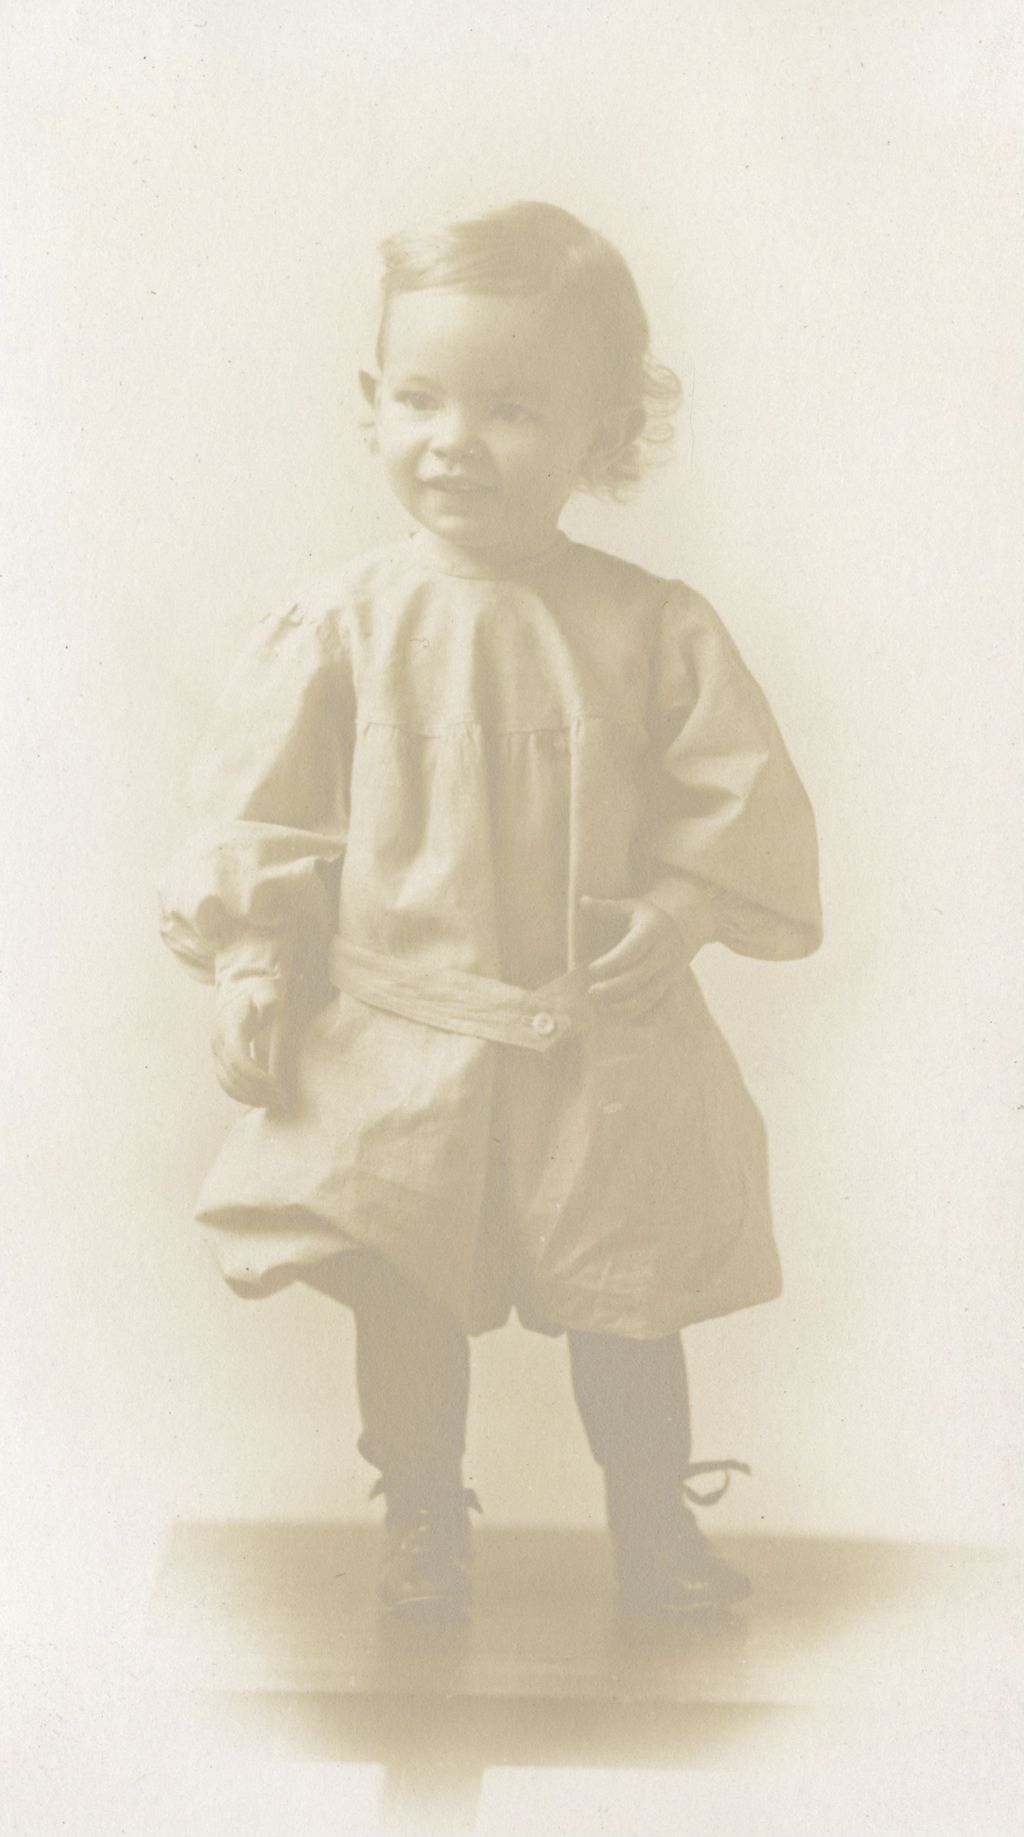 Miniature of Photographic portrait of young boy, Vaughan Sanders